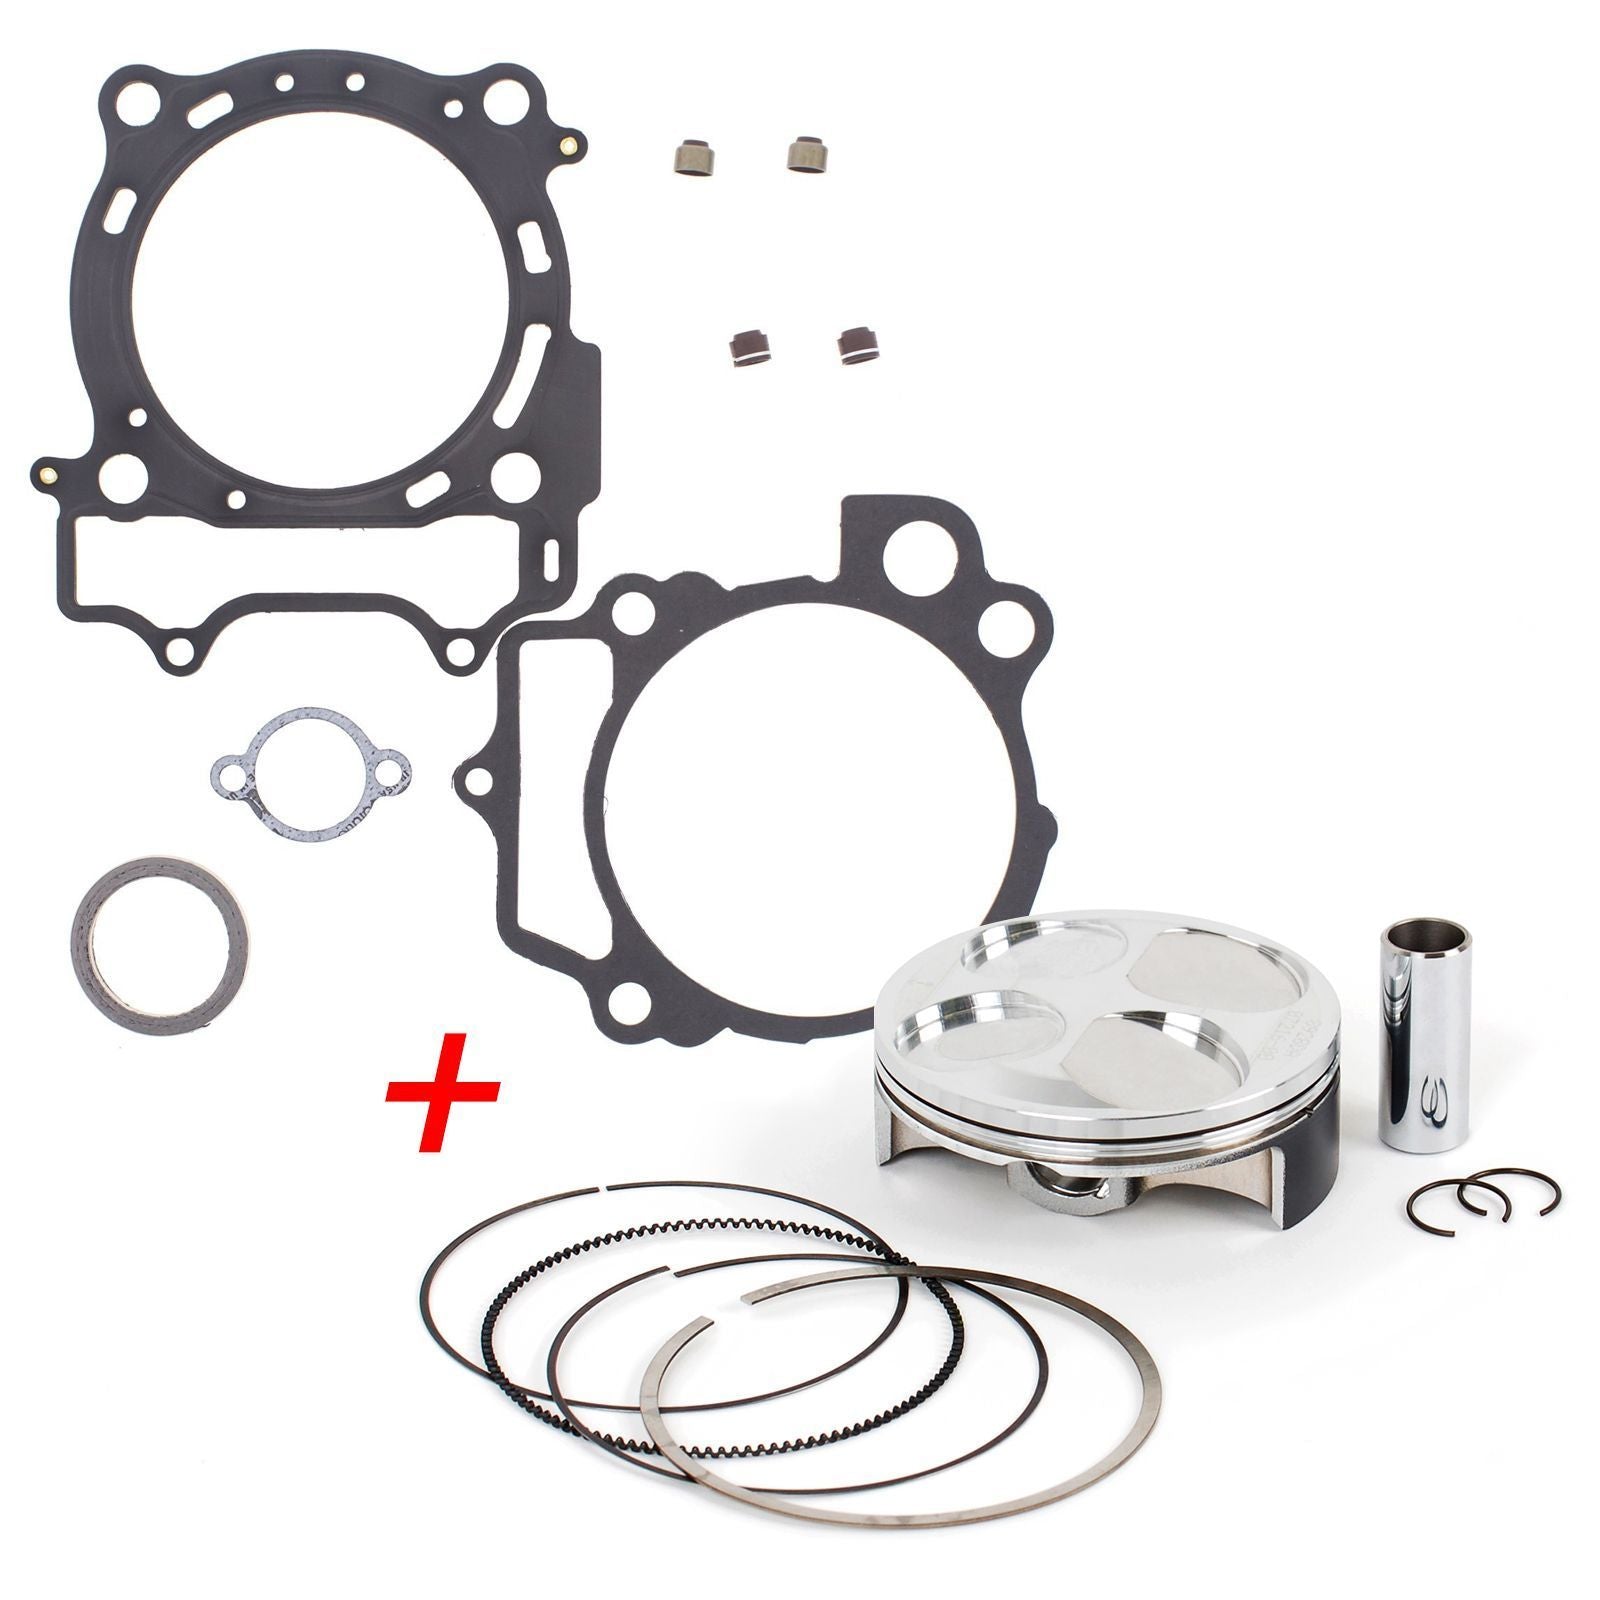 New Top End Rebuild Kit (A) For Yamaha WR450F 2007-2015 #ERTY034A